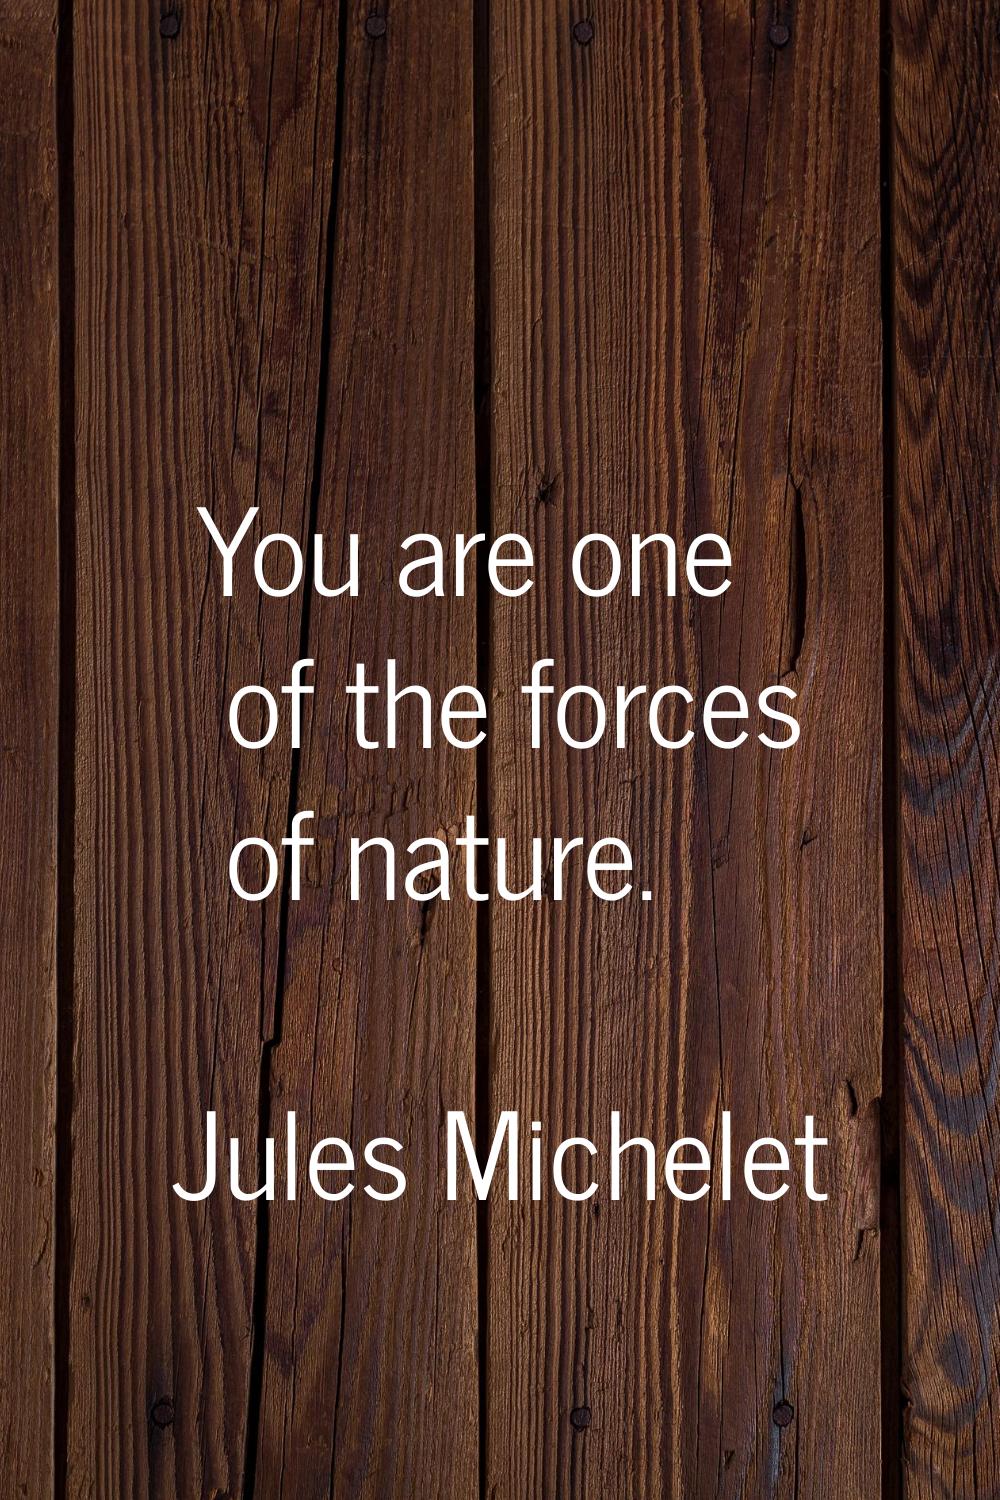 You are one of the forces of nature.